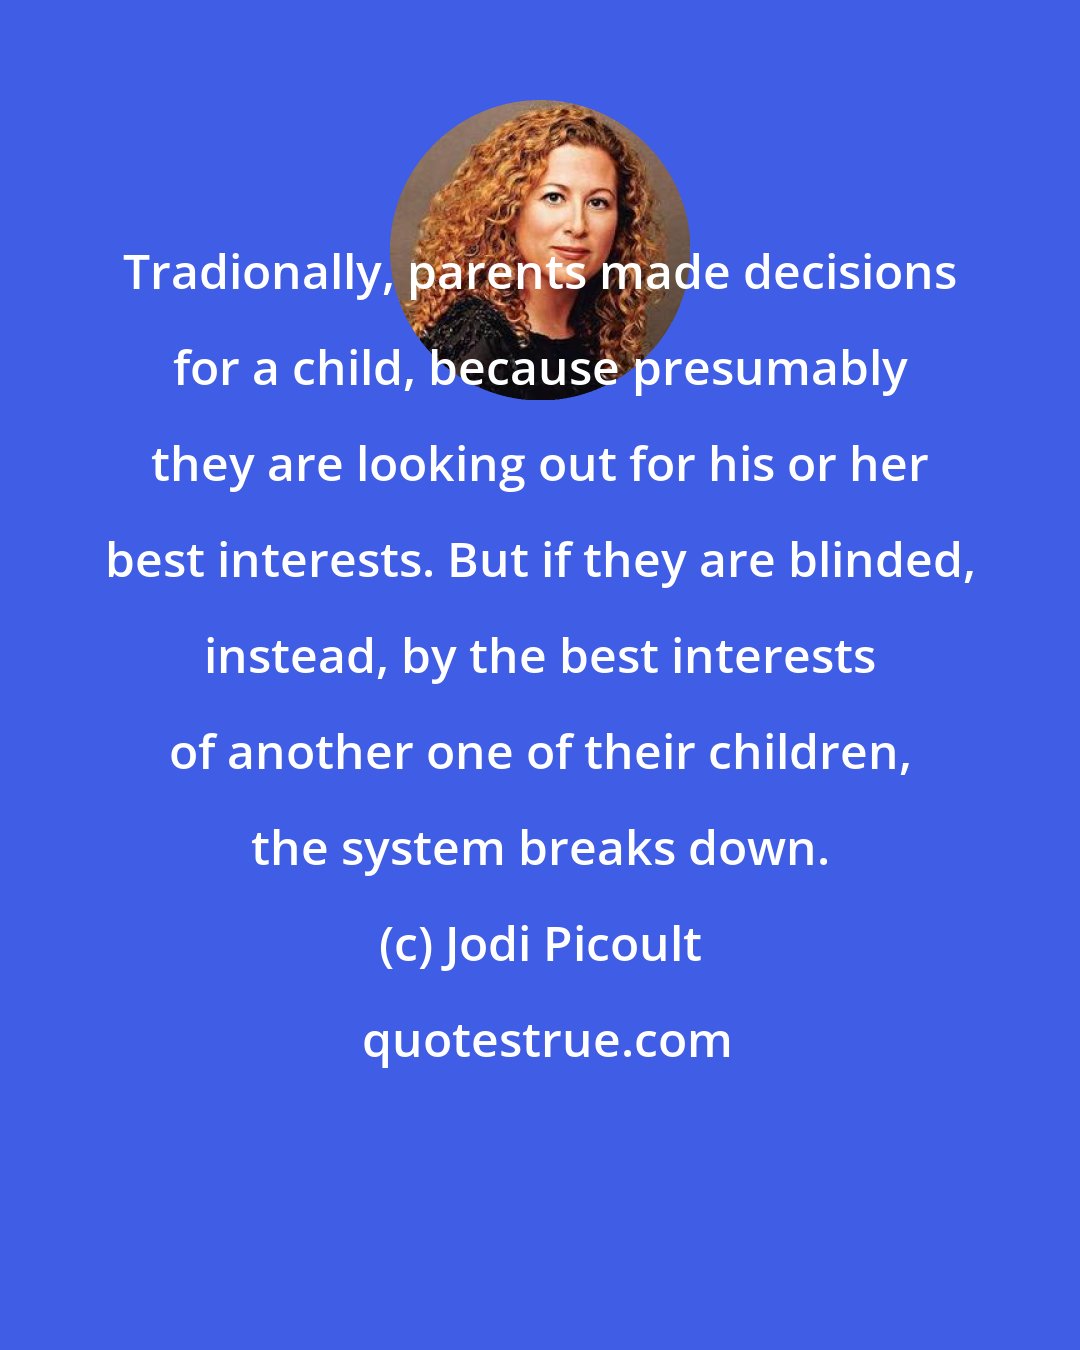 Jodi Picoult: Tradionally, parents made decisions for a child, because presumably they are looking out for his or her best interests. But if they are blinded, instead, by the best interests of another one of their children, the system breaks down.